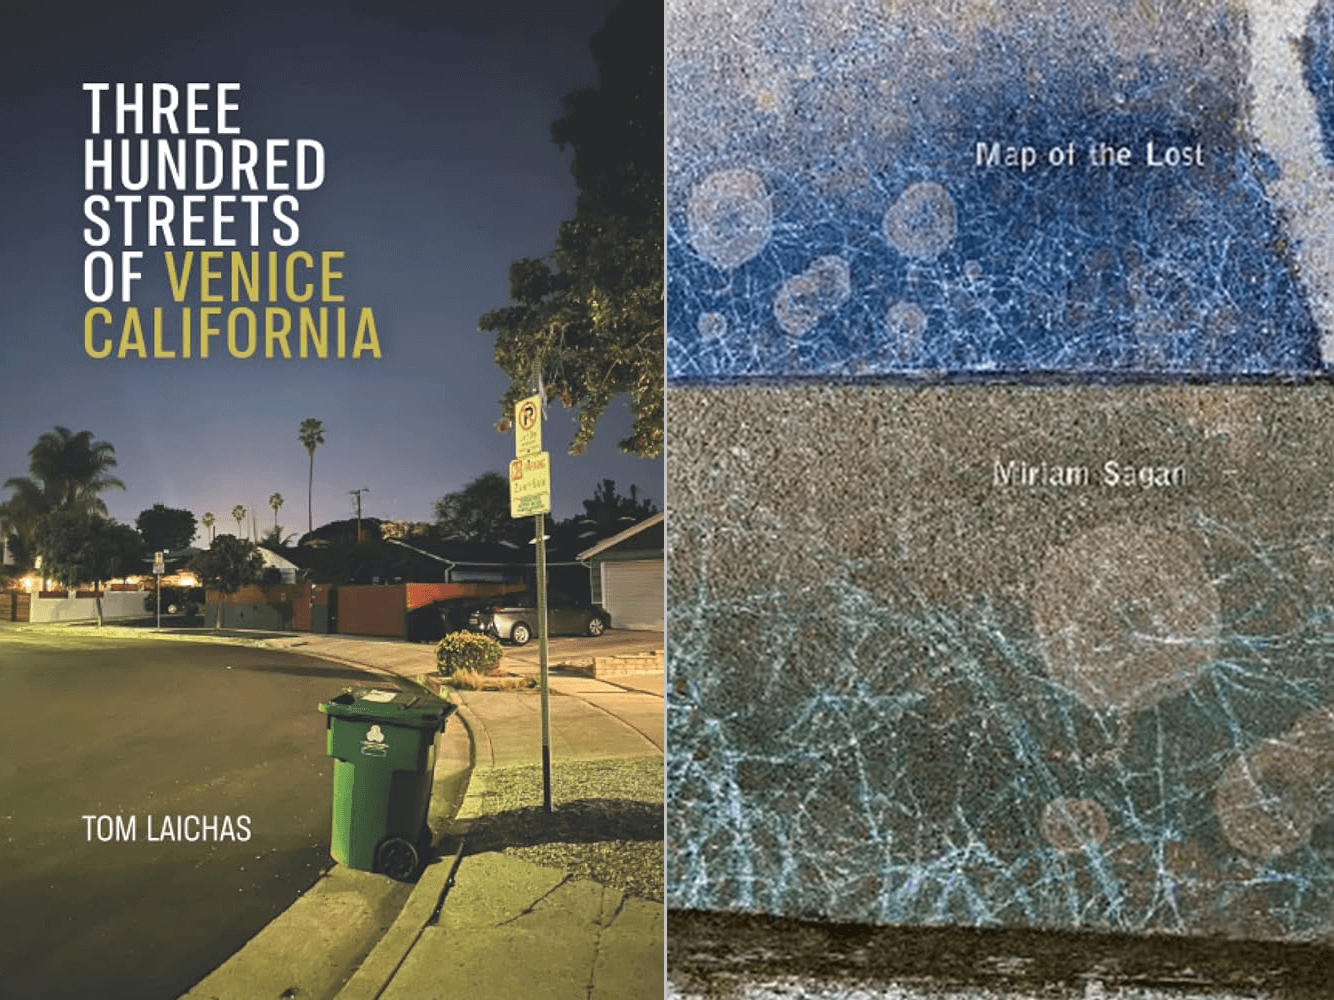 Cover of Three Hundreds Streets of Venice California and Maps of the Lost